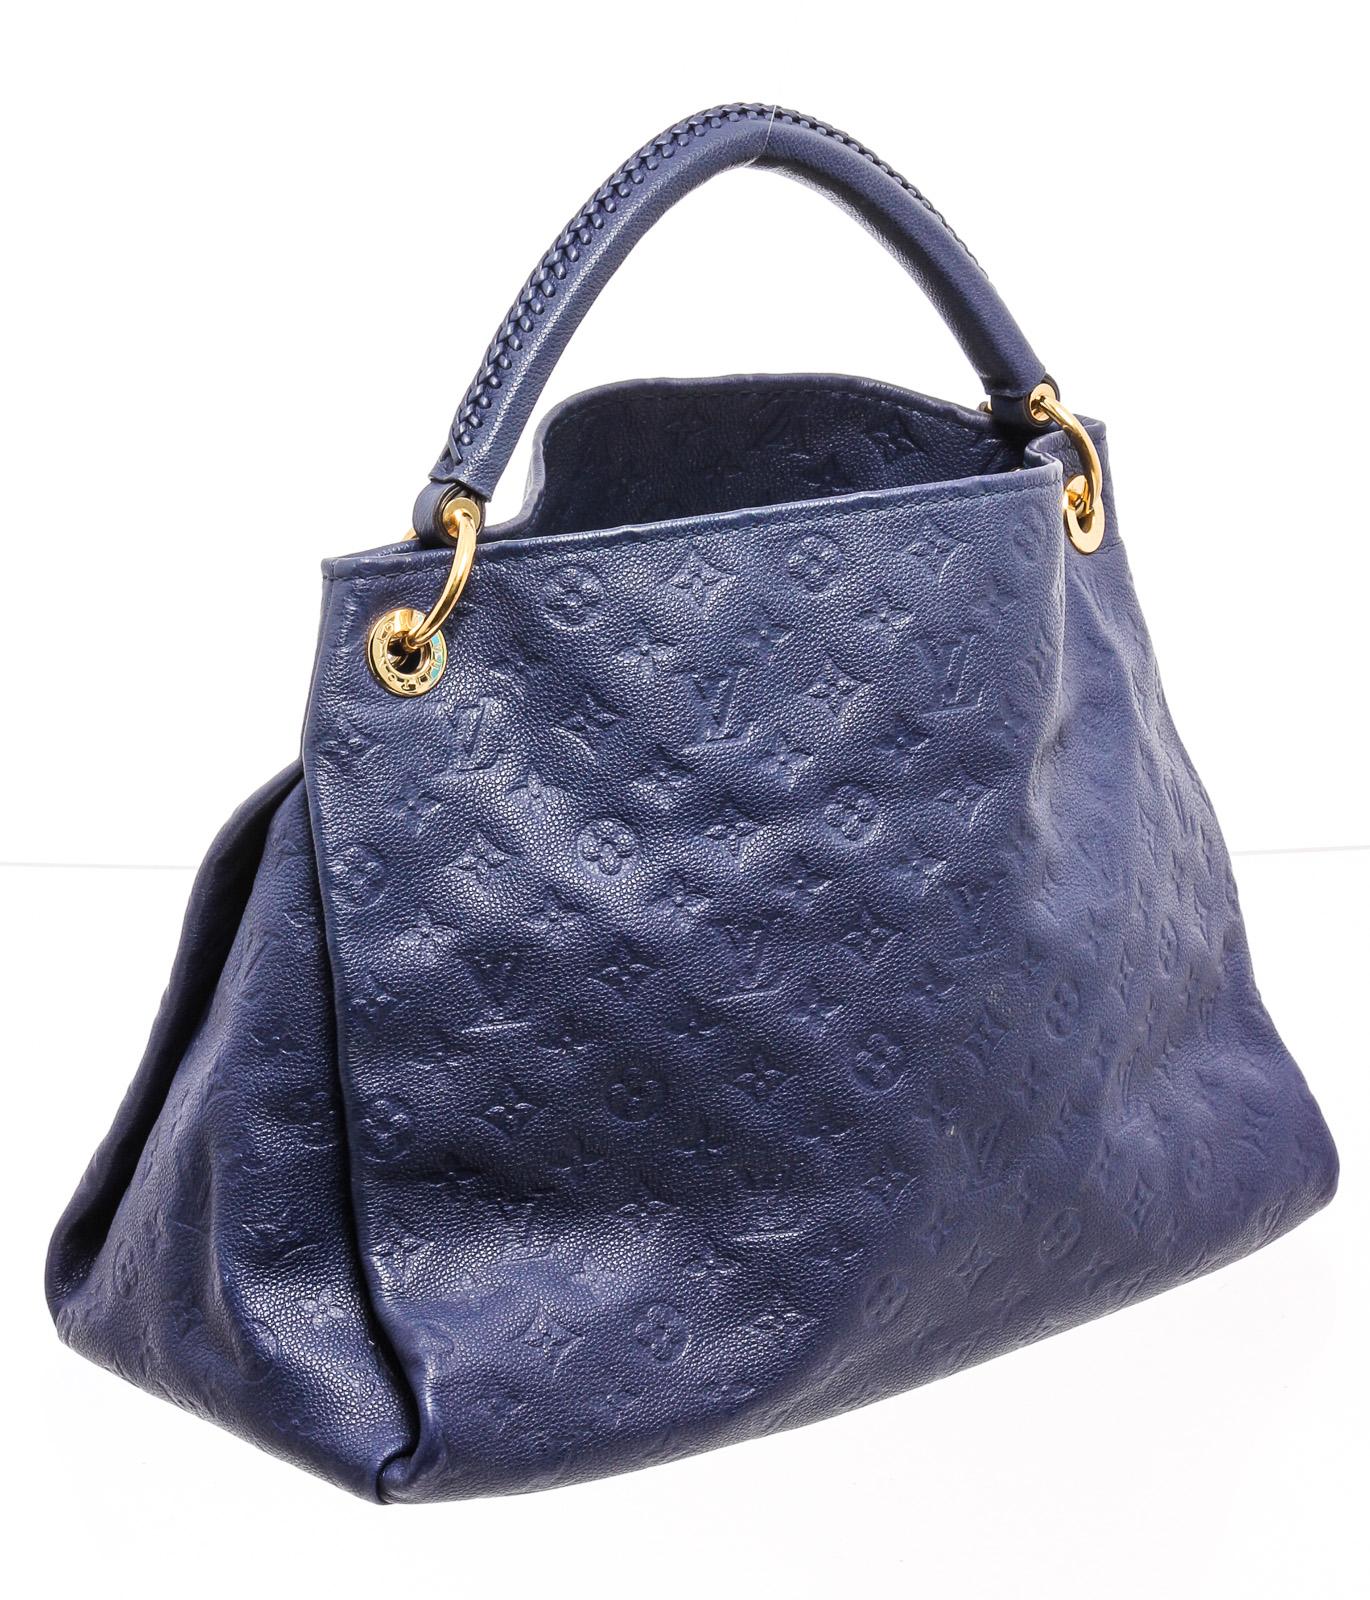 Blue Empreinte leather Louis Vuitton Artsy MM with brass hardware, rolled top handle featuring whipstitched detail, tonal striped canvas lining, seven pockets at interior walls; one with zip closure and open top.

22591MS